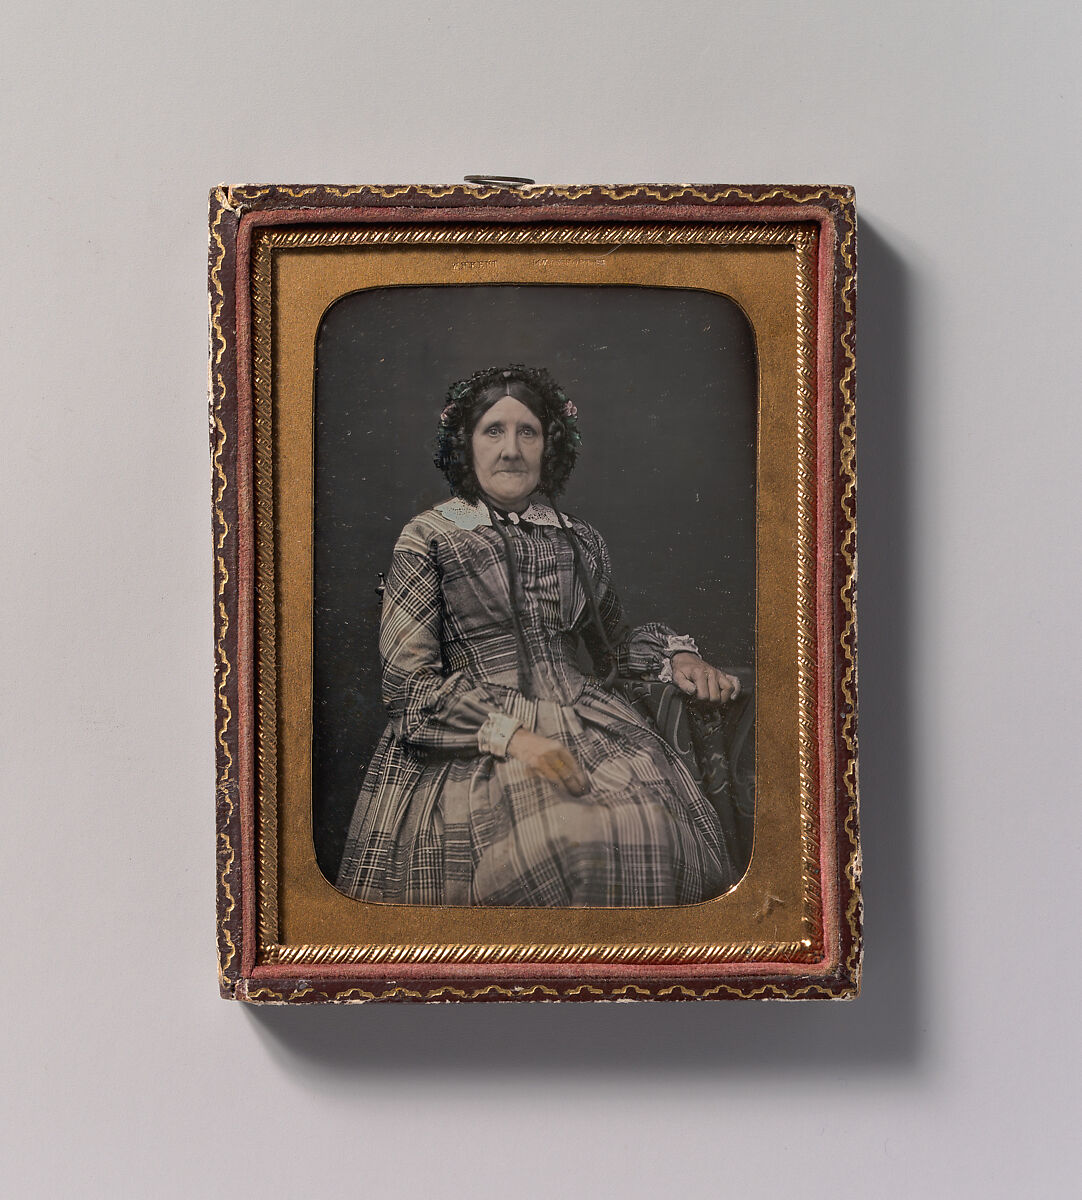 [Seated Elderly Woman Wearing Plaid Dress and Bonnet], William Hardy Kent (American, England 1819–1907 England), Daguerreotype with applied color 